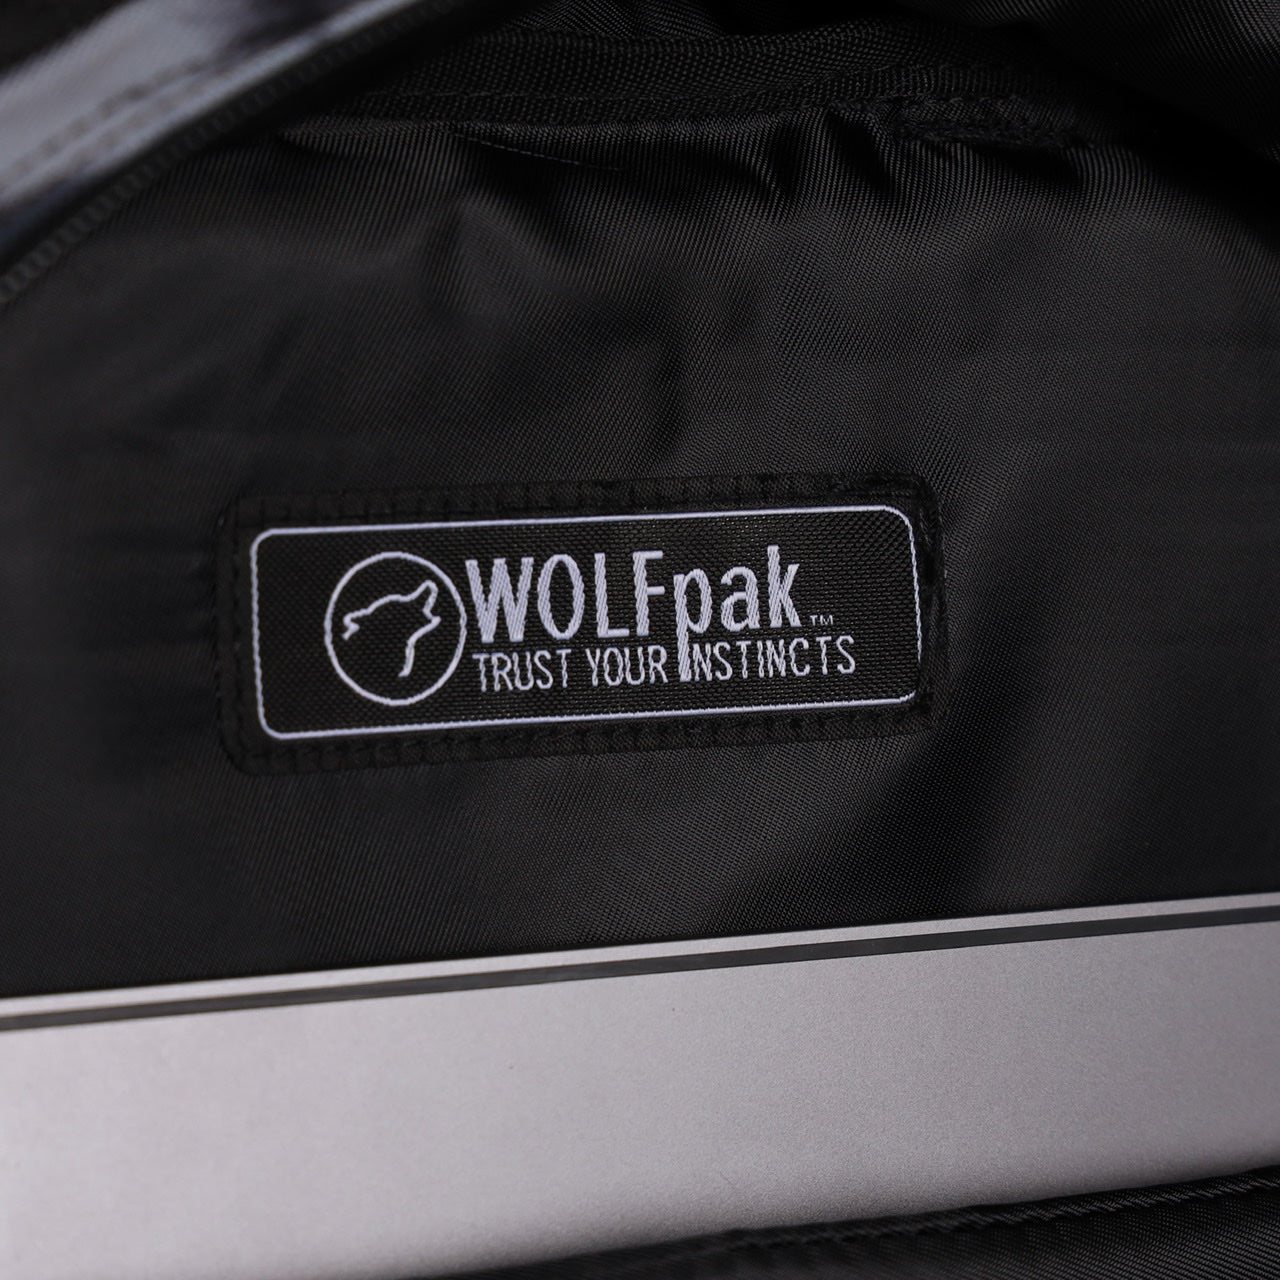 25L Backpack Timber Wolf Eclipse